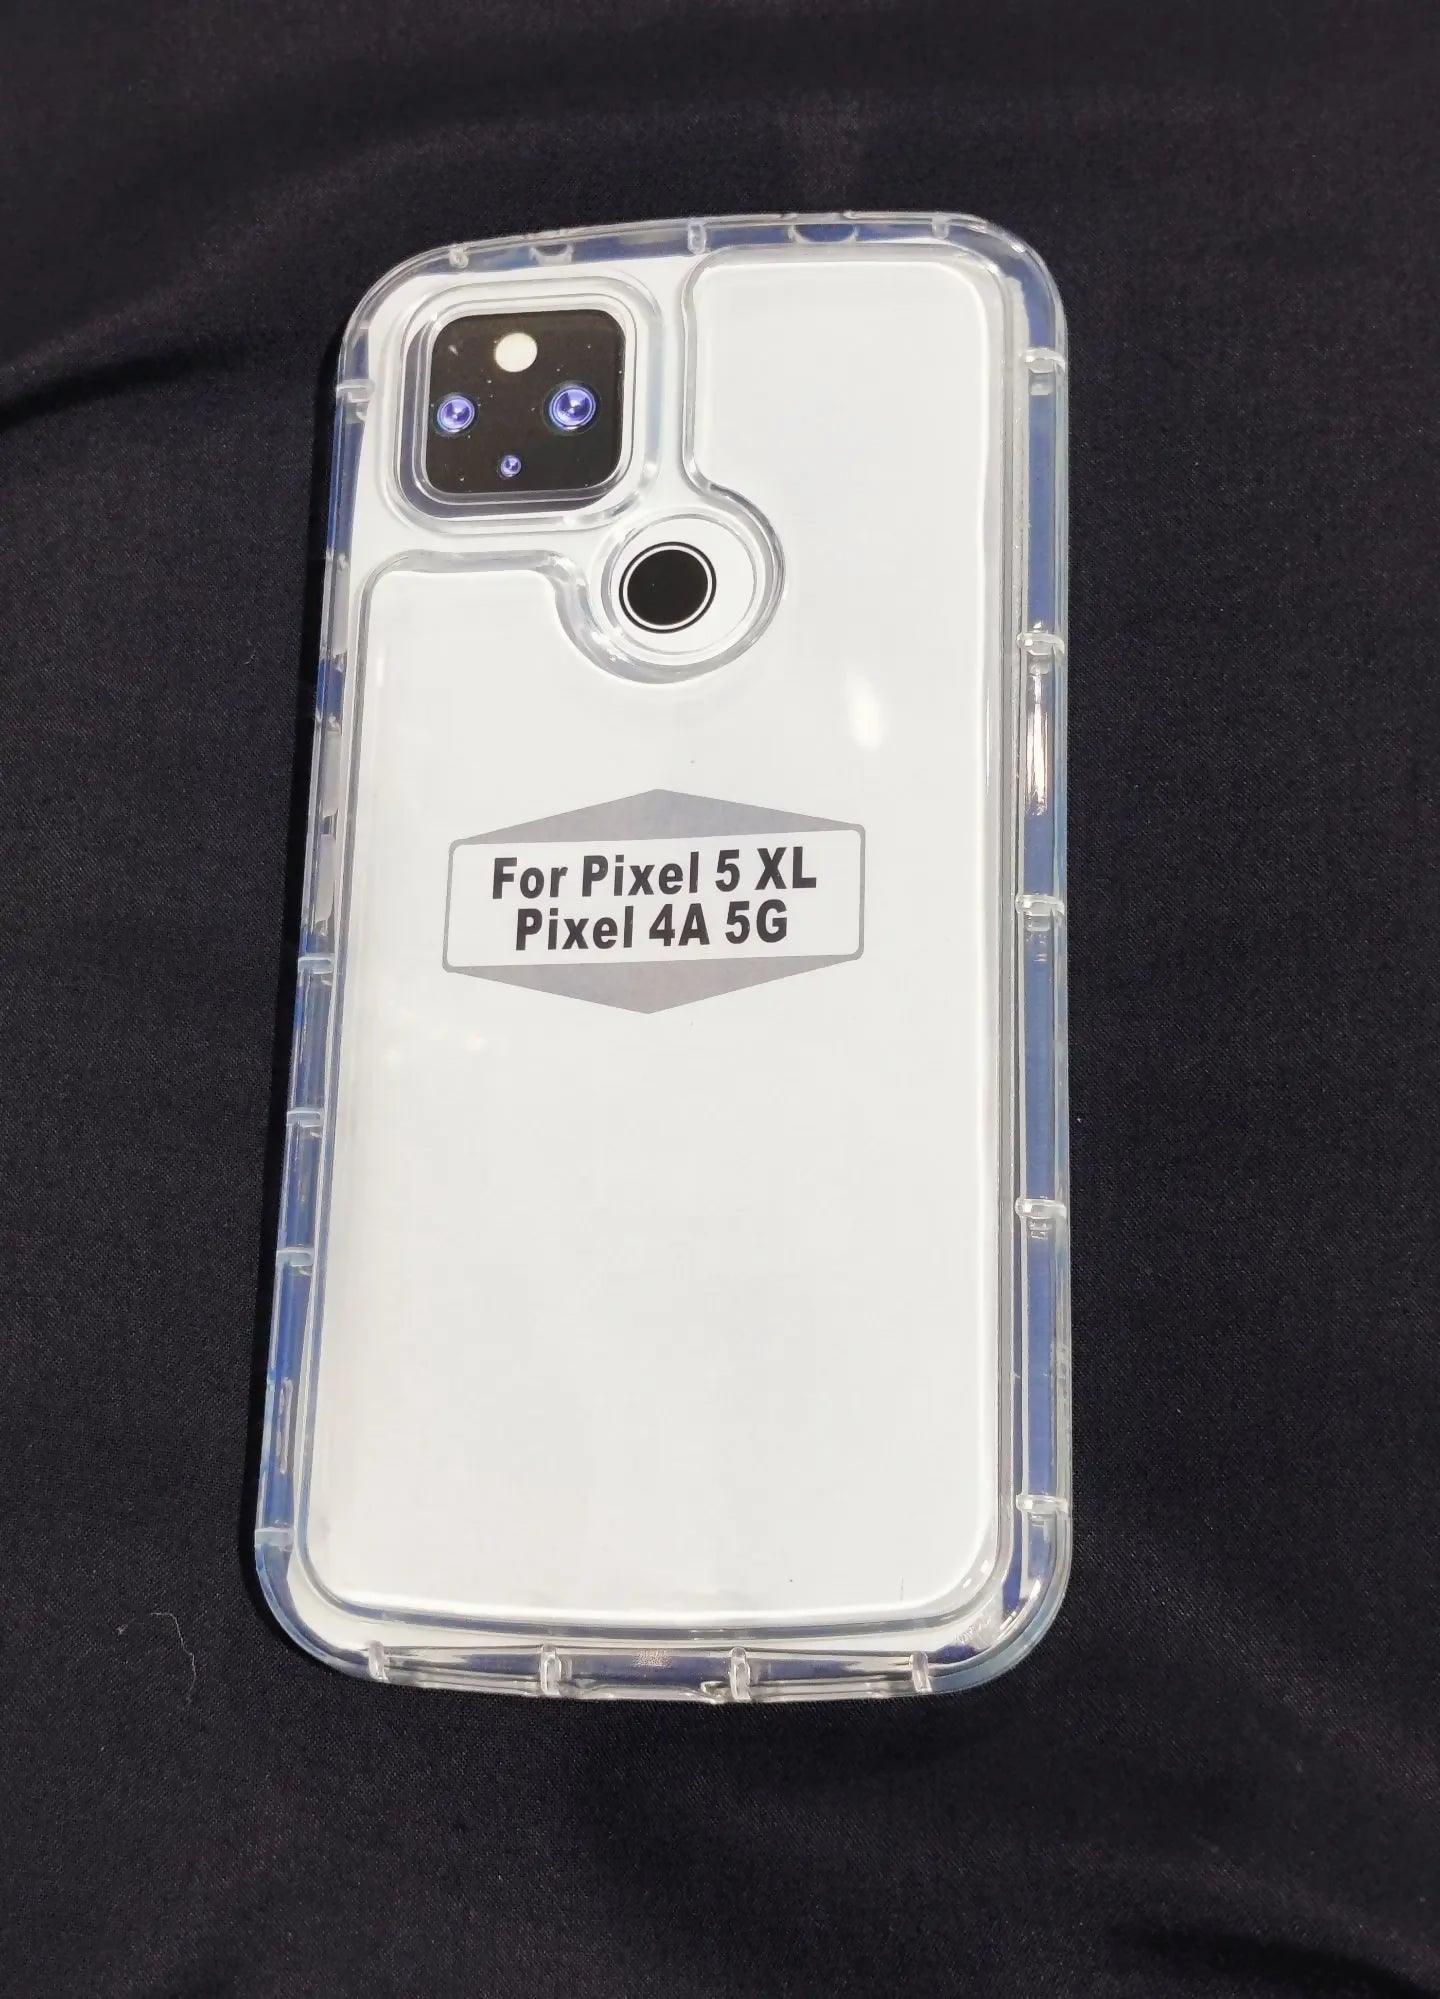 Pixel 4a 5g back cover airbag cover - ValueBox